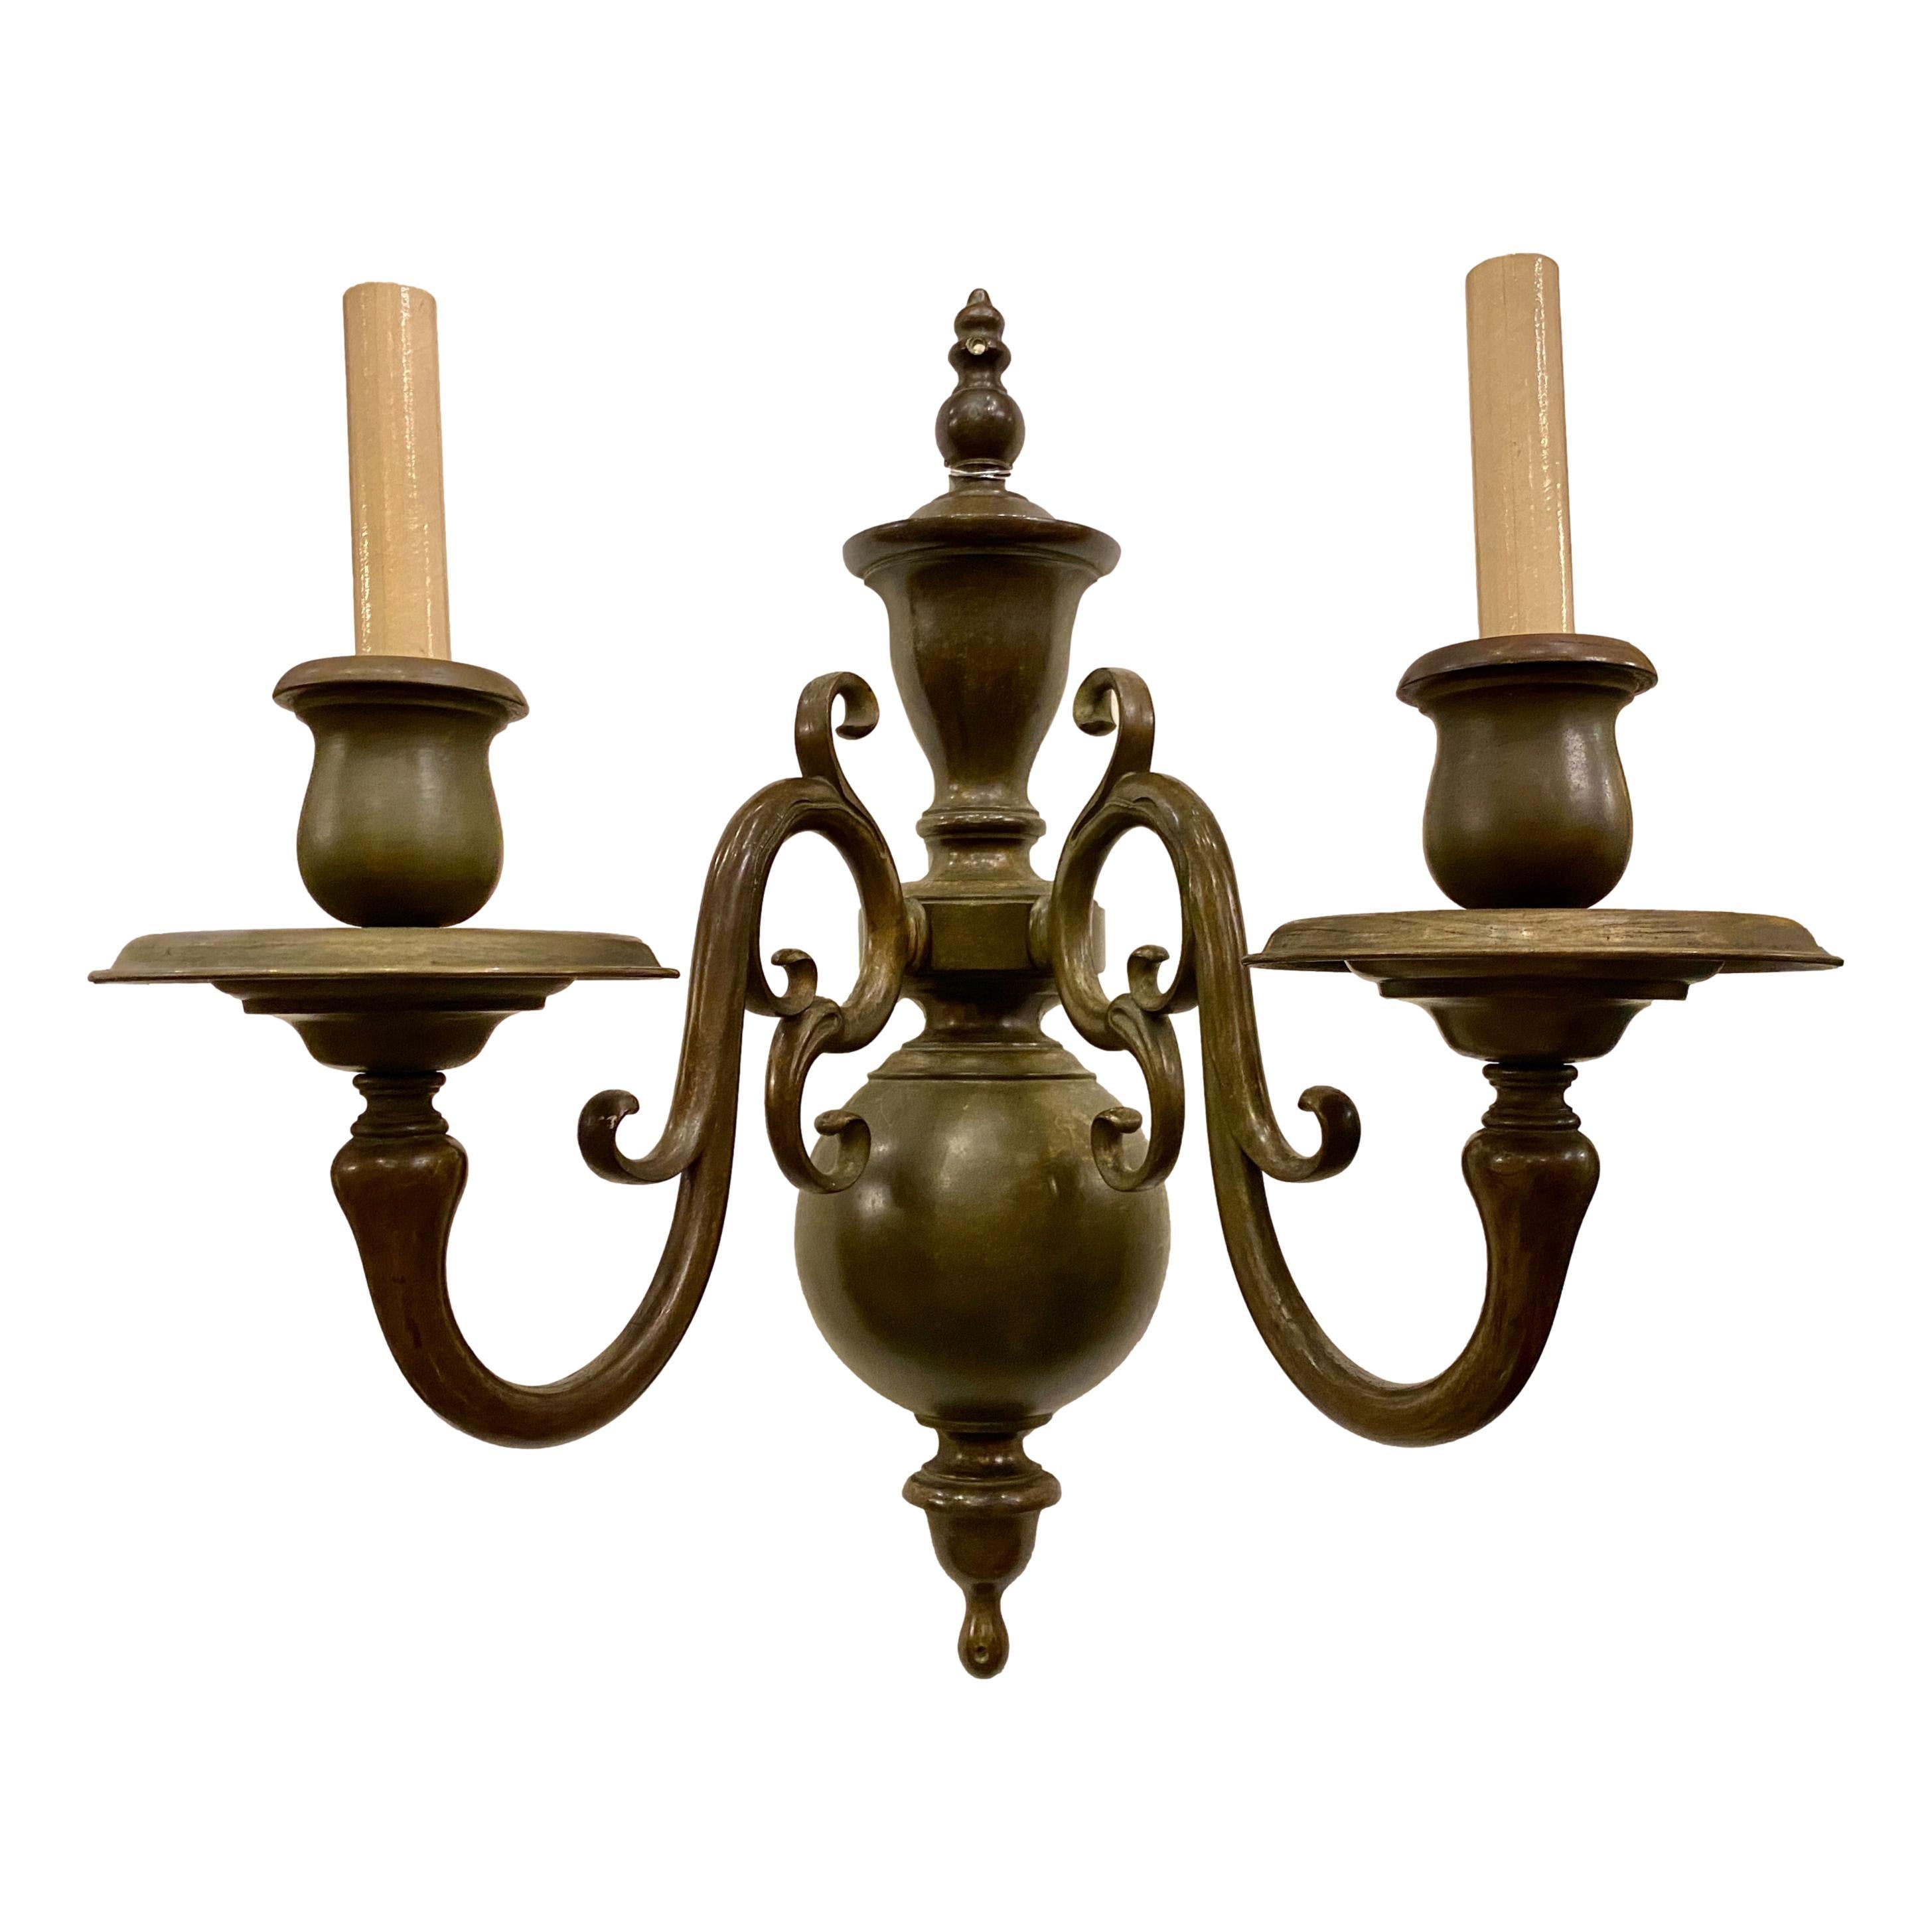 Pair of circa 1900 Dutch two-arm lights sconces in a patinated bronze finish.

Measurements:
Height: 20.5